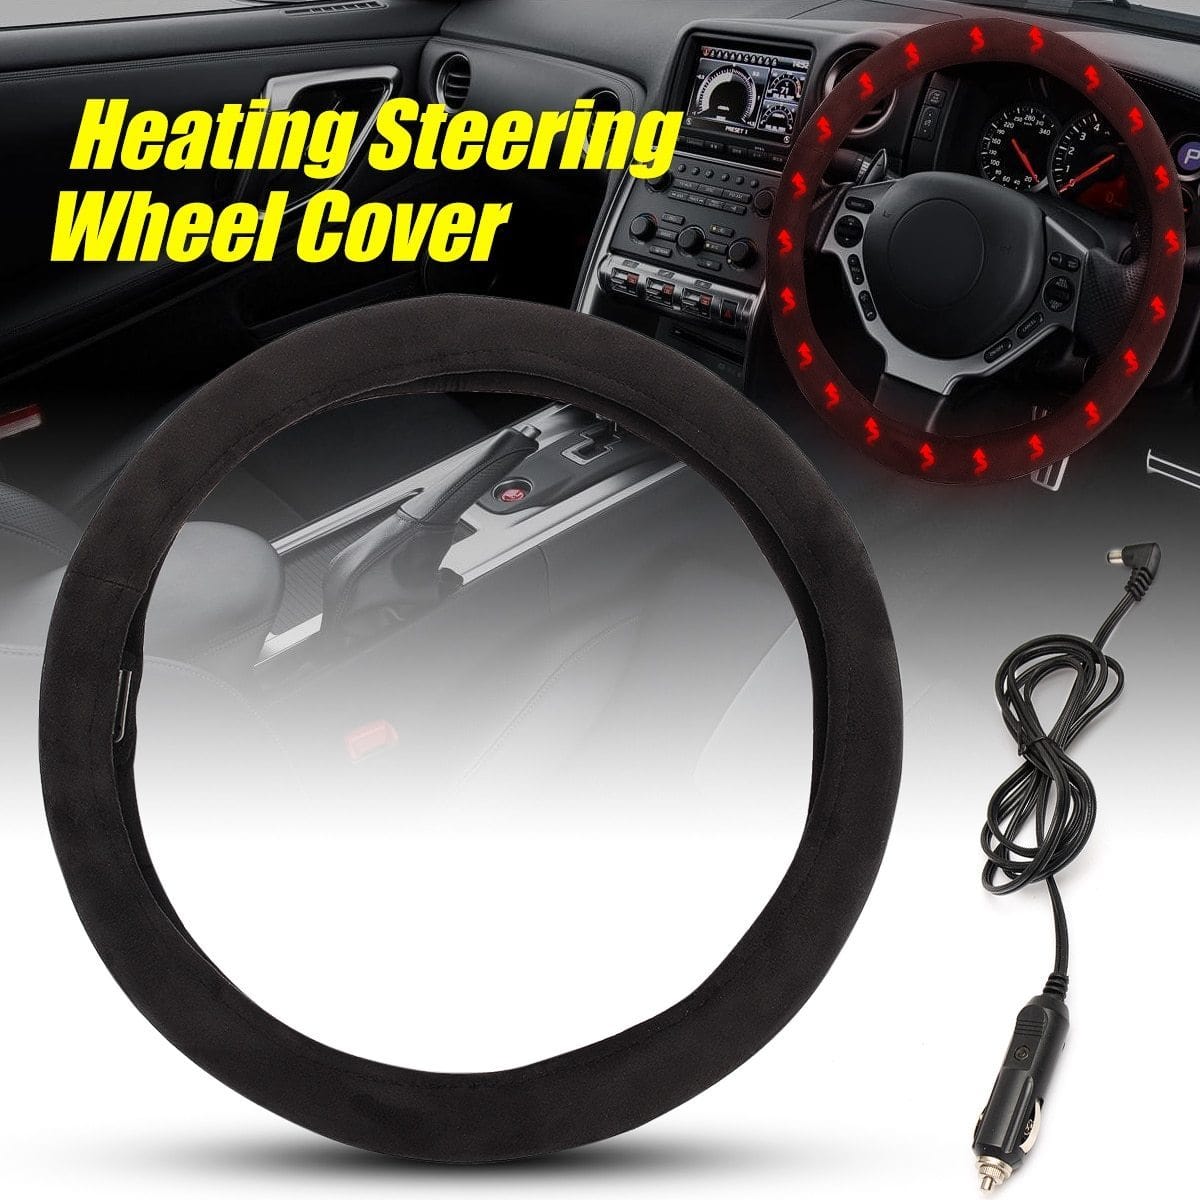 Steering Covers Heated Universal Car Steering Wheel Cover [50% OFF Today Only] - DiyosWorld